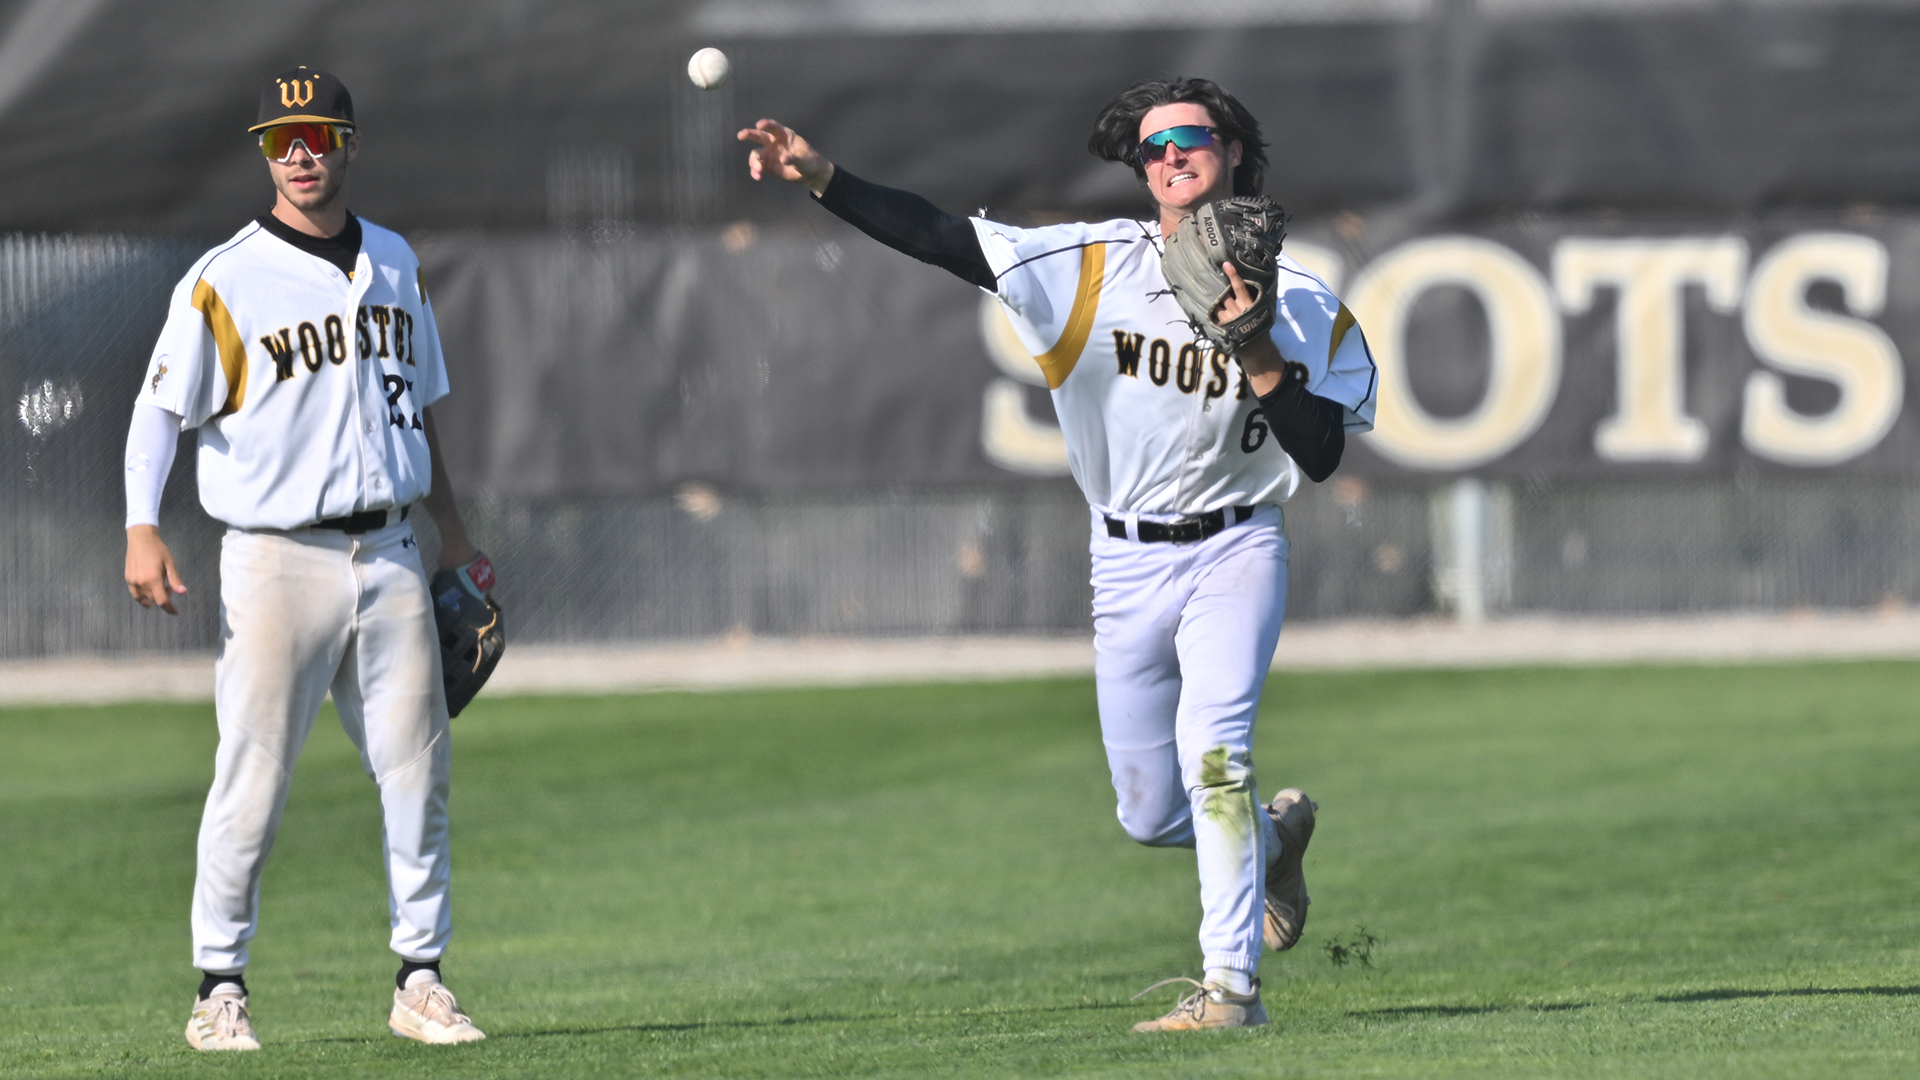 Grant Mitchell, Wooster Baseball